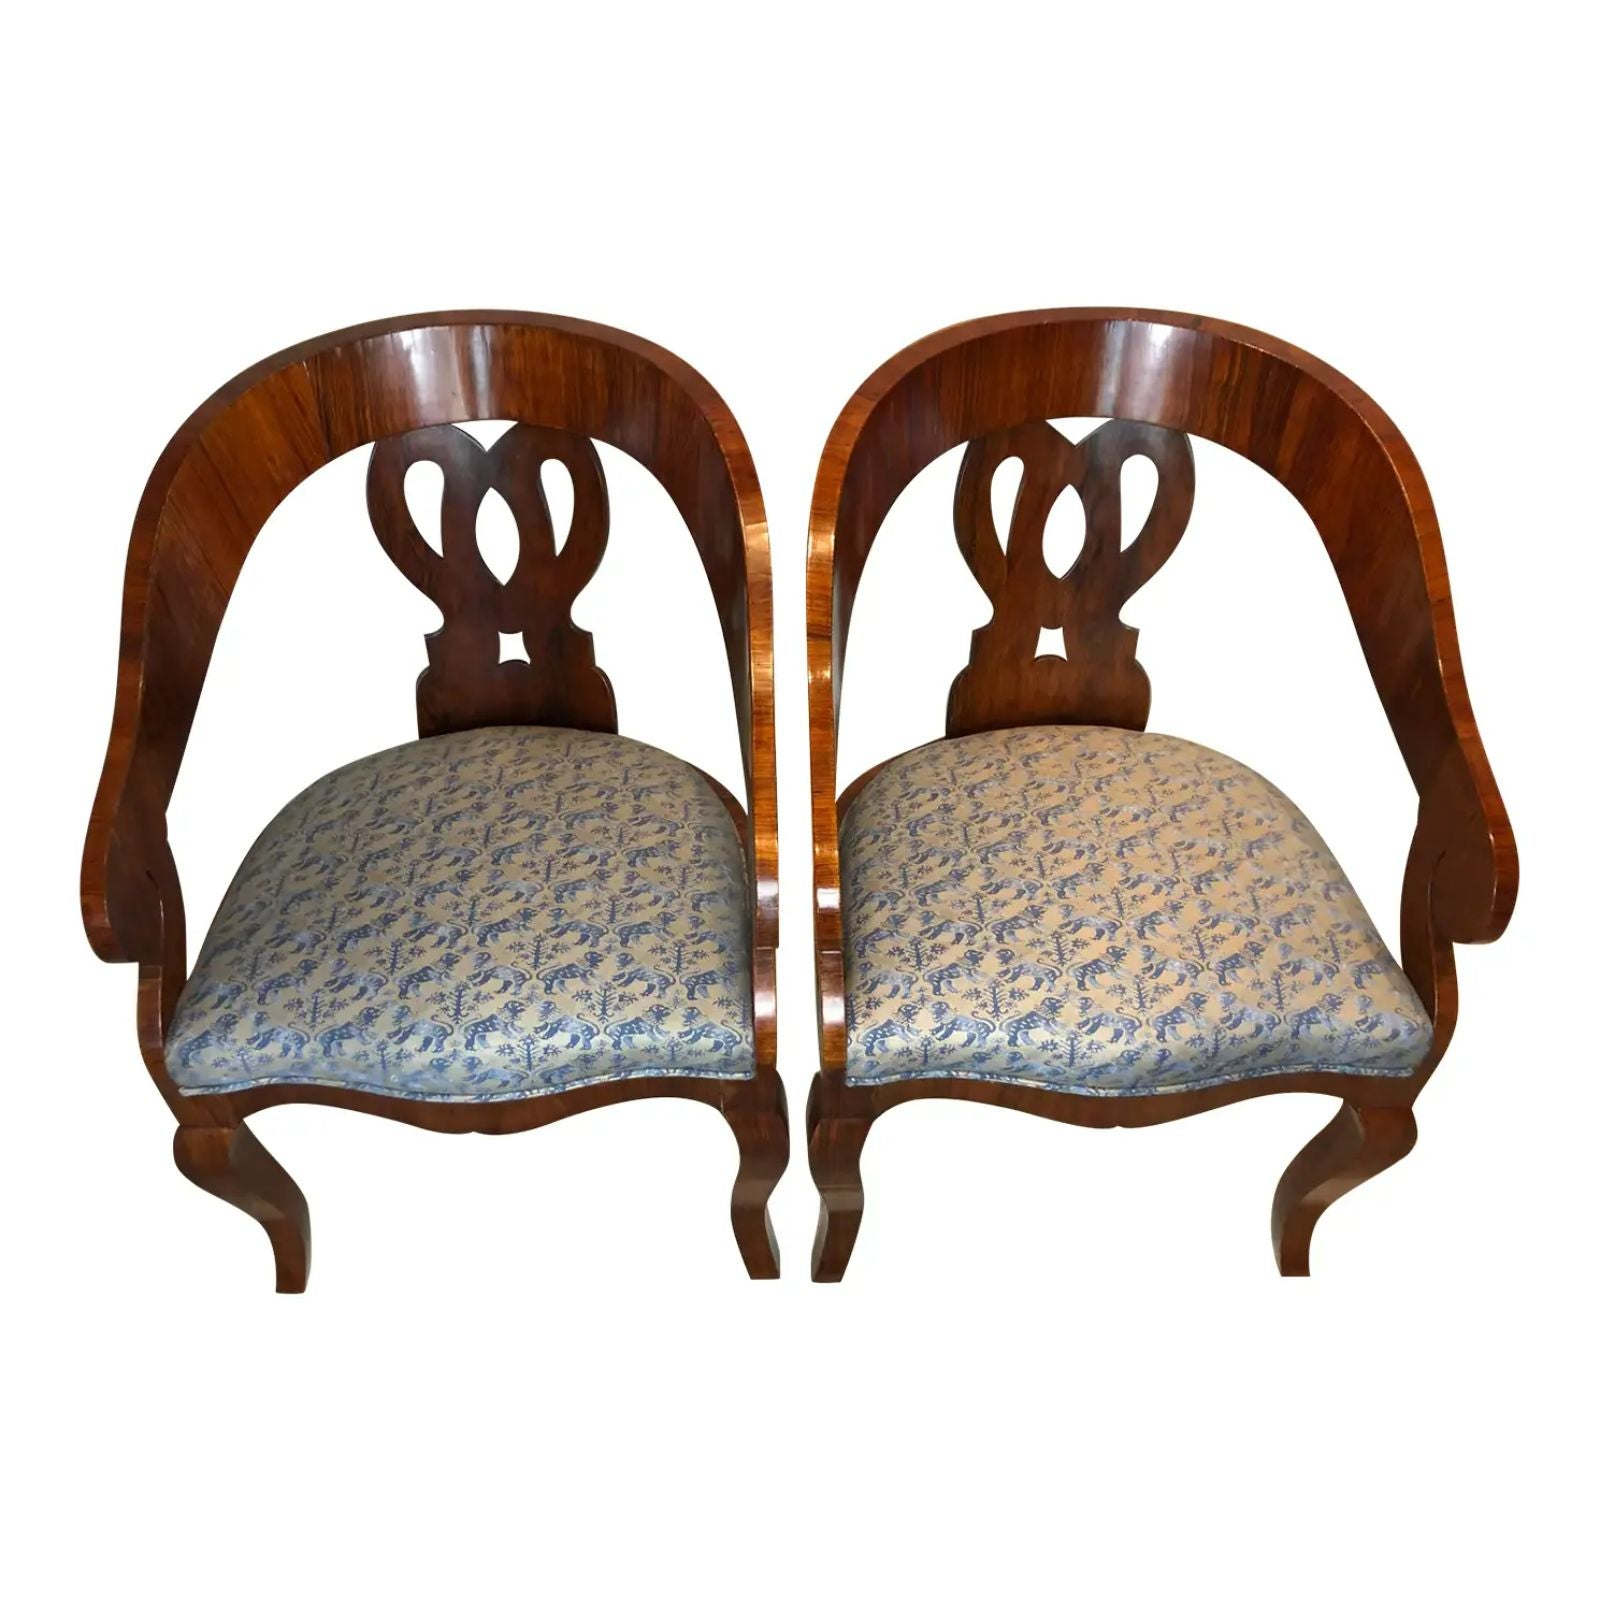 Pair of Antique Biedermeier Mahogany Barrel Chairs with Fortuny Seats